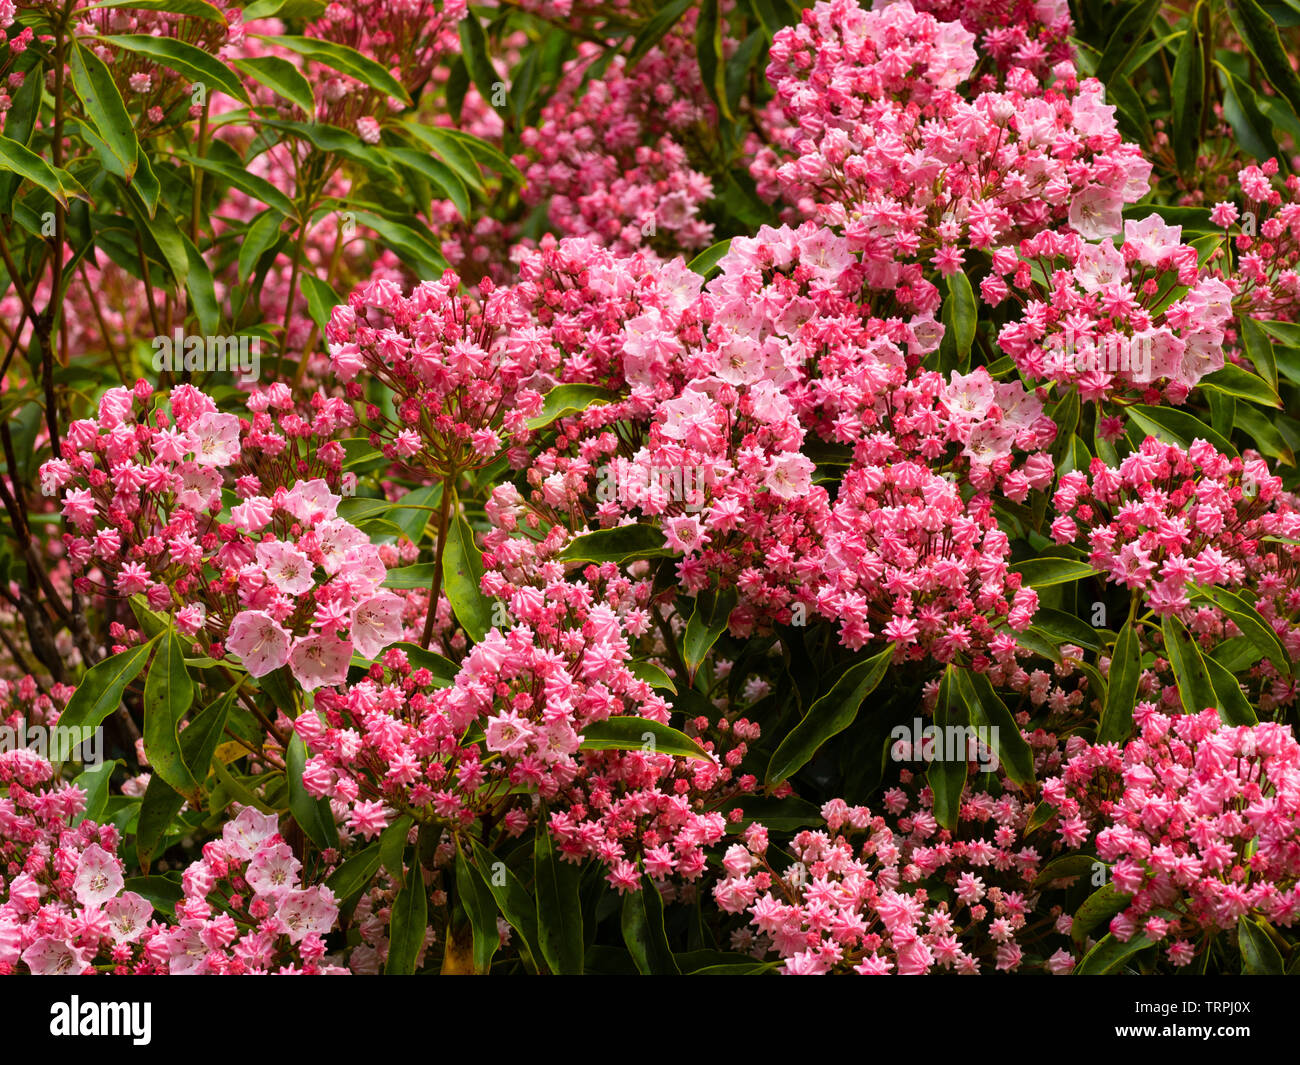 Pleated buds and opening flowers of the hardy evergreen mountain laurel, Kalmia latifolia Stock Photo